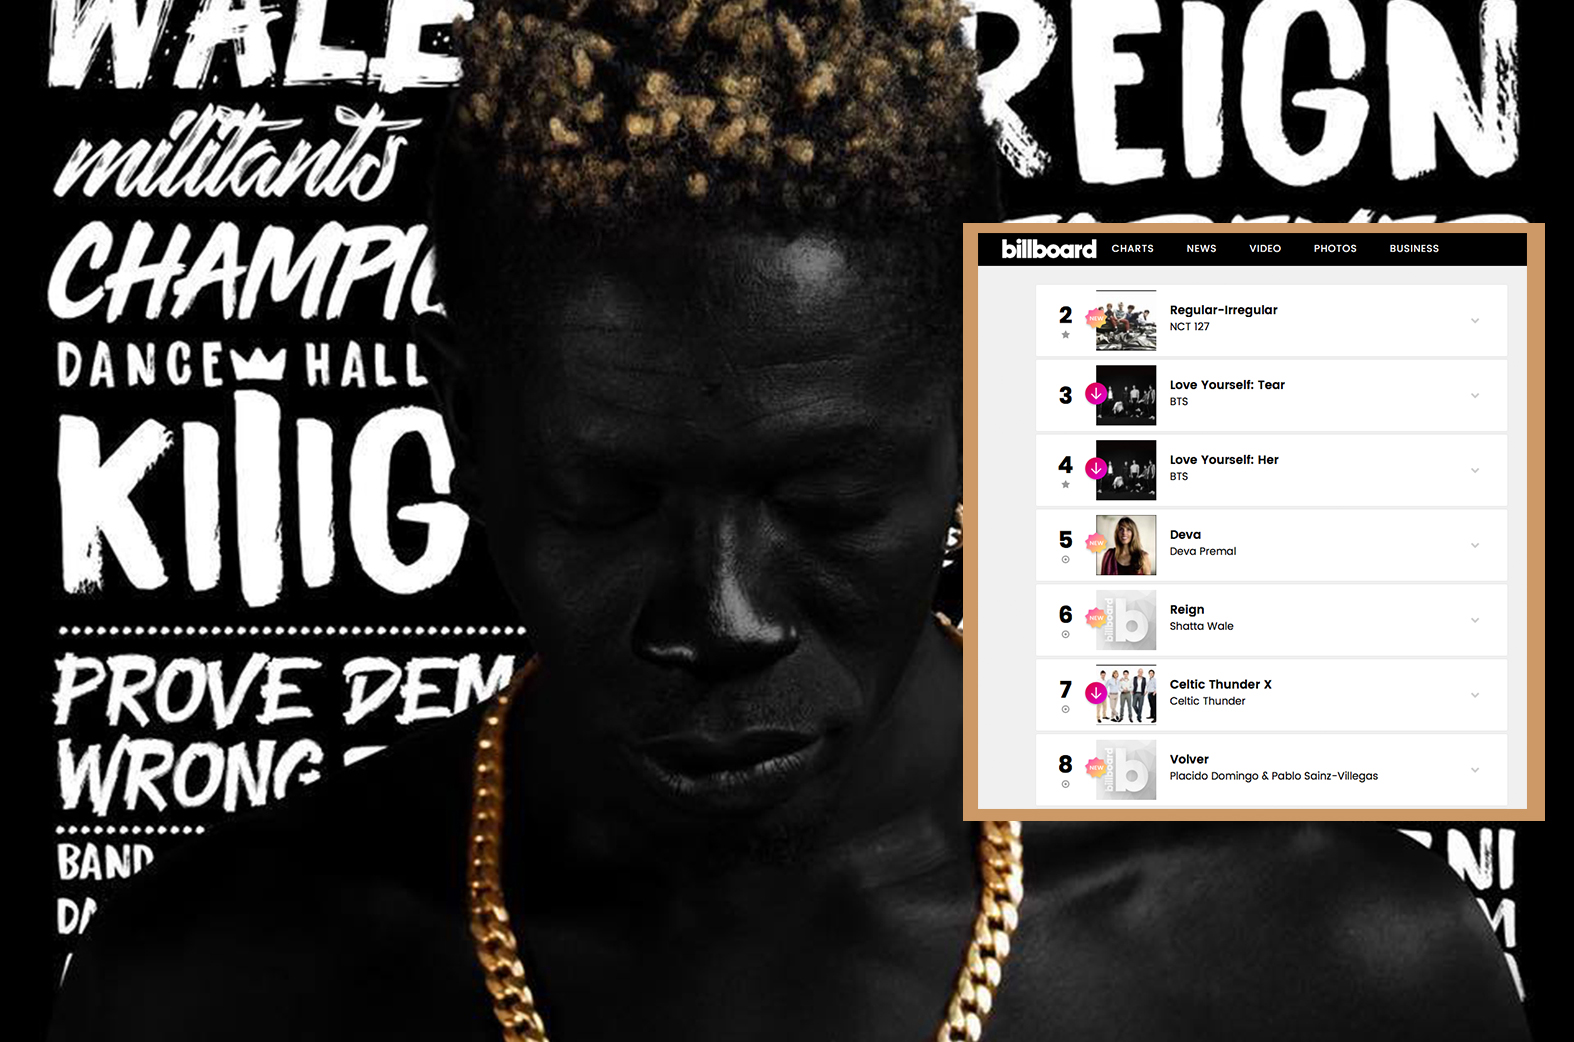 Shatta Wale’s Reign Album gets listed on Billboard charts